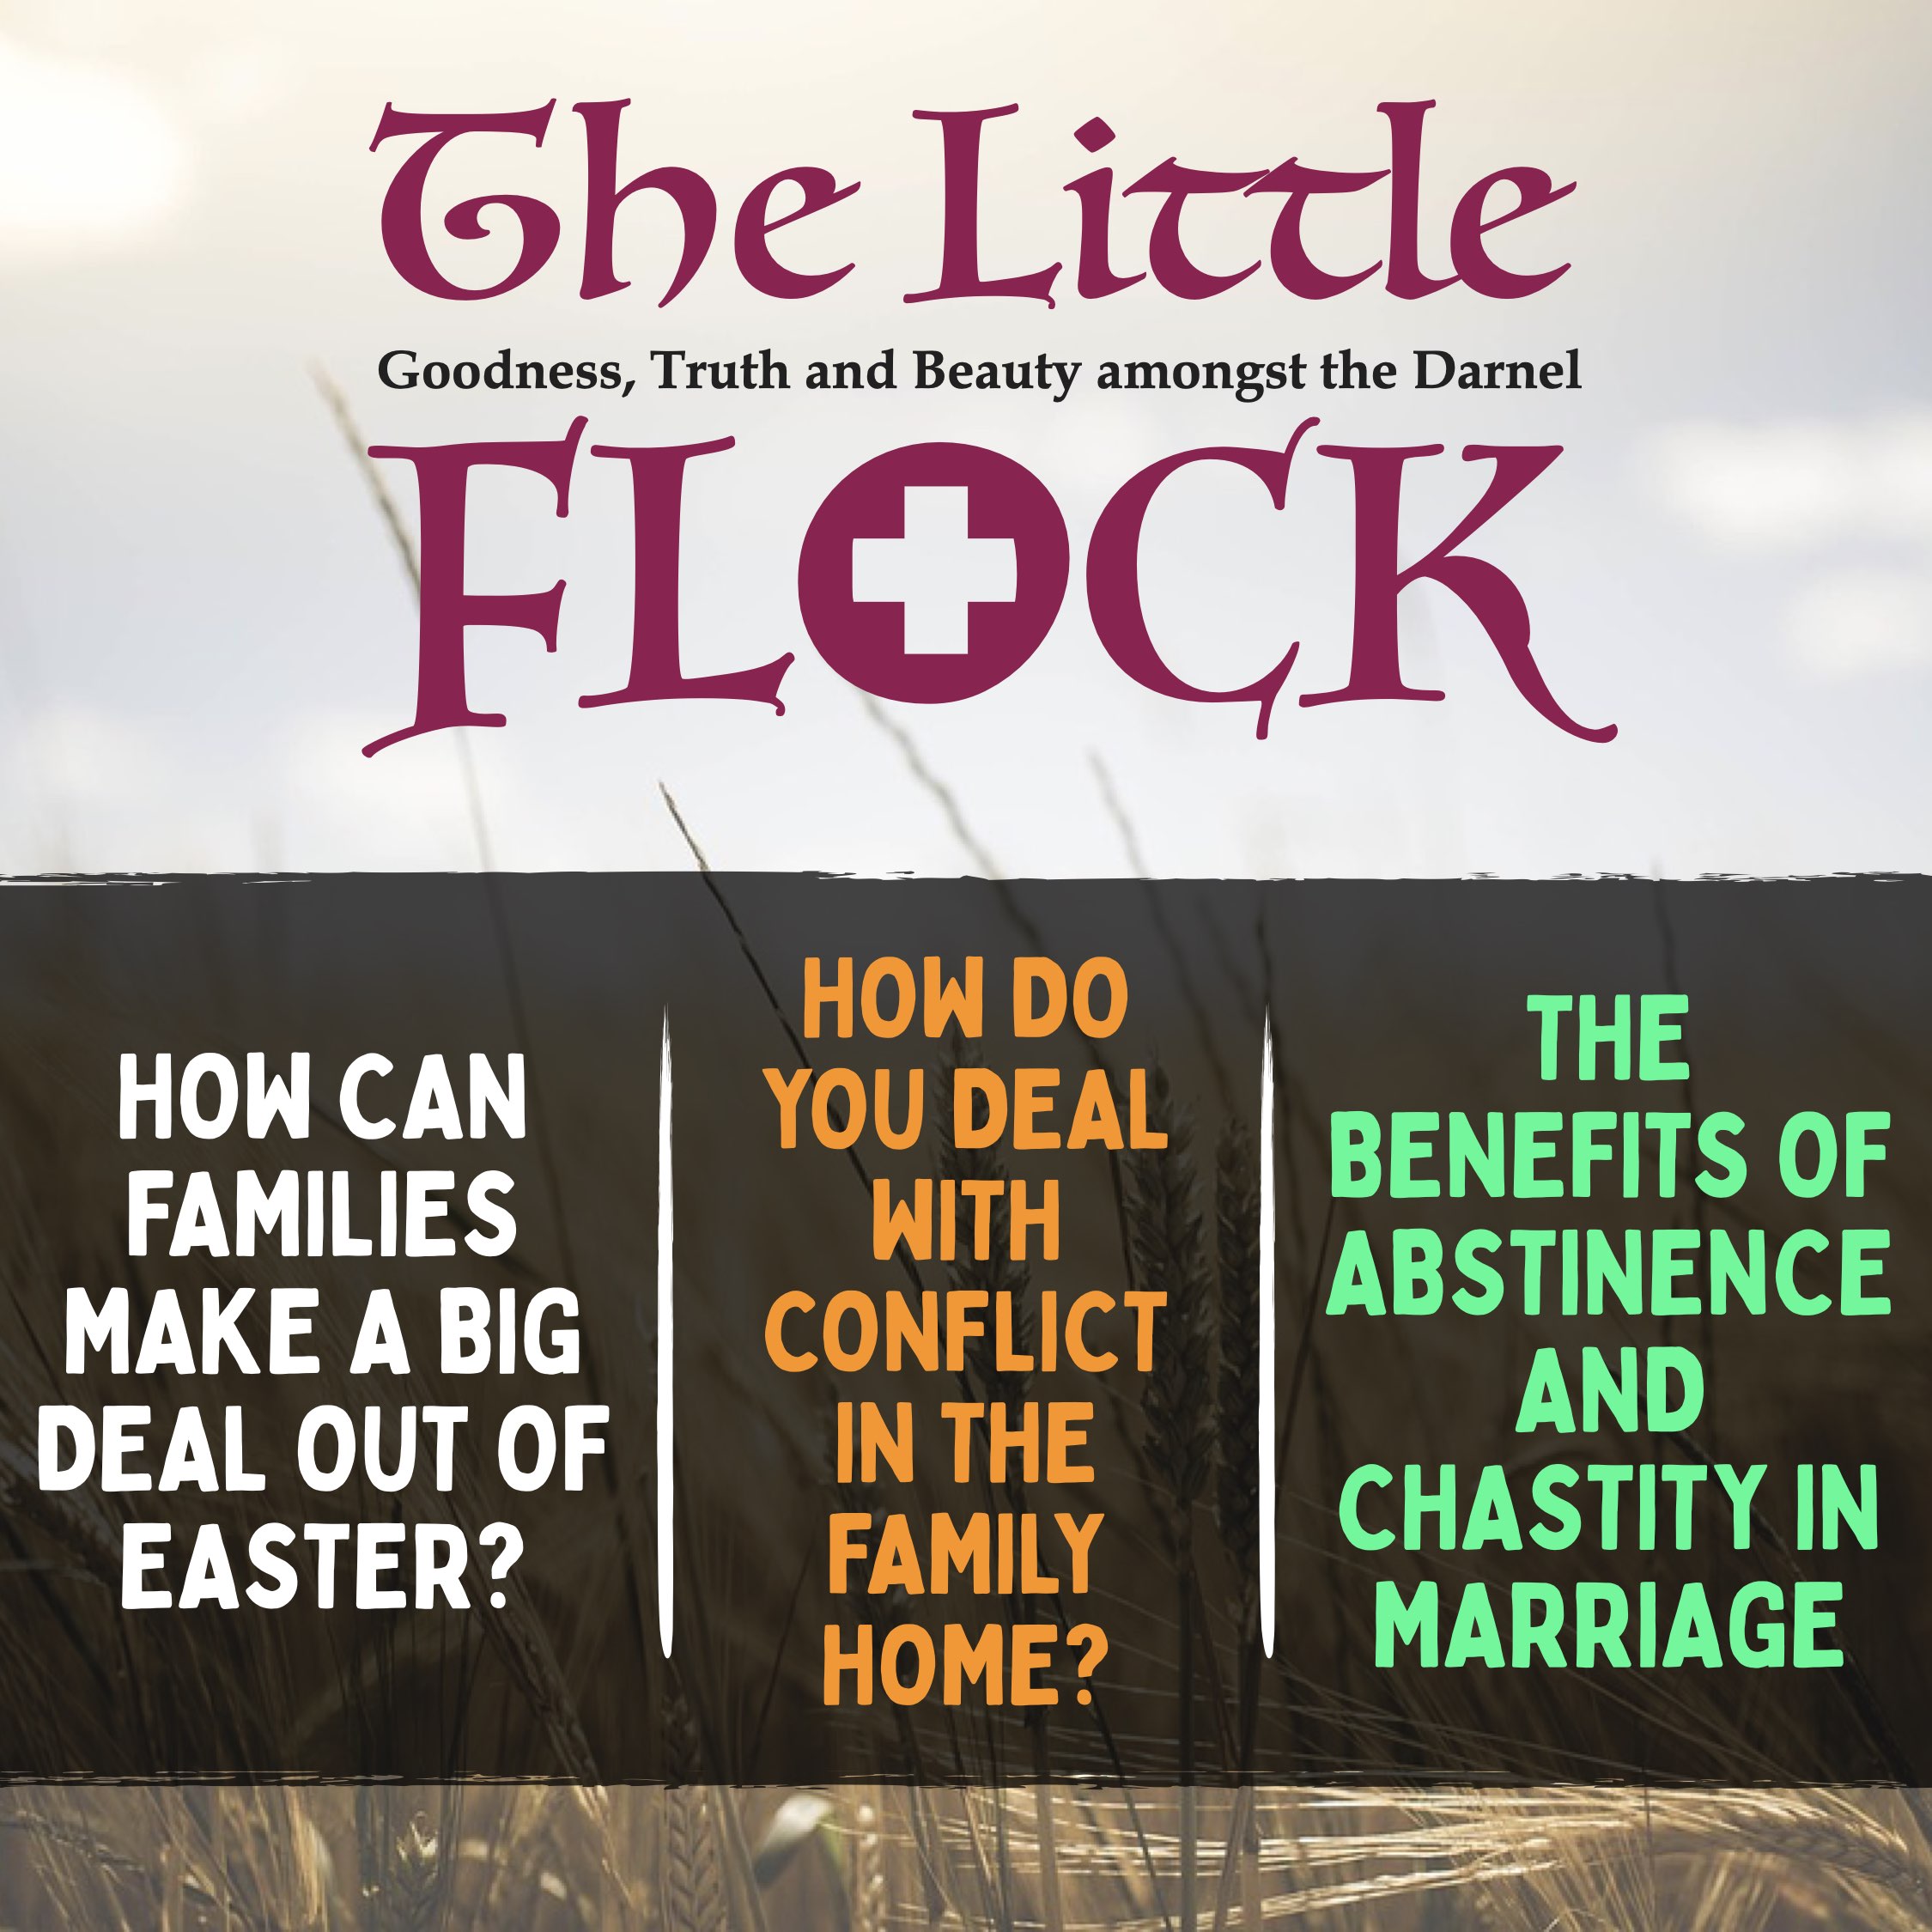 9. How do families make a big deal of Easter? How do deal with conflict? The benefits of abstinence in a marriage